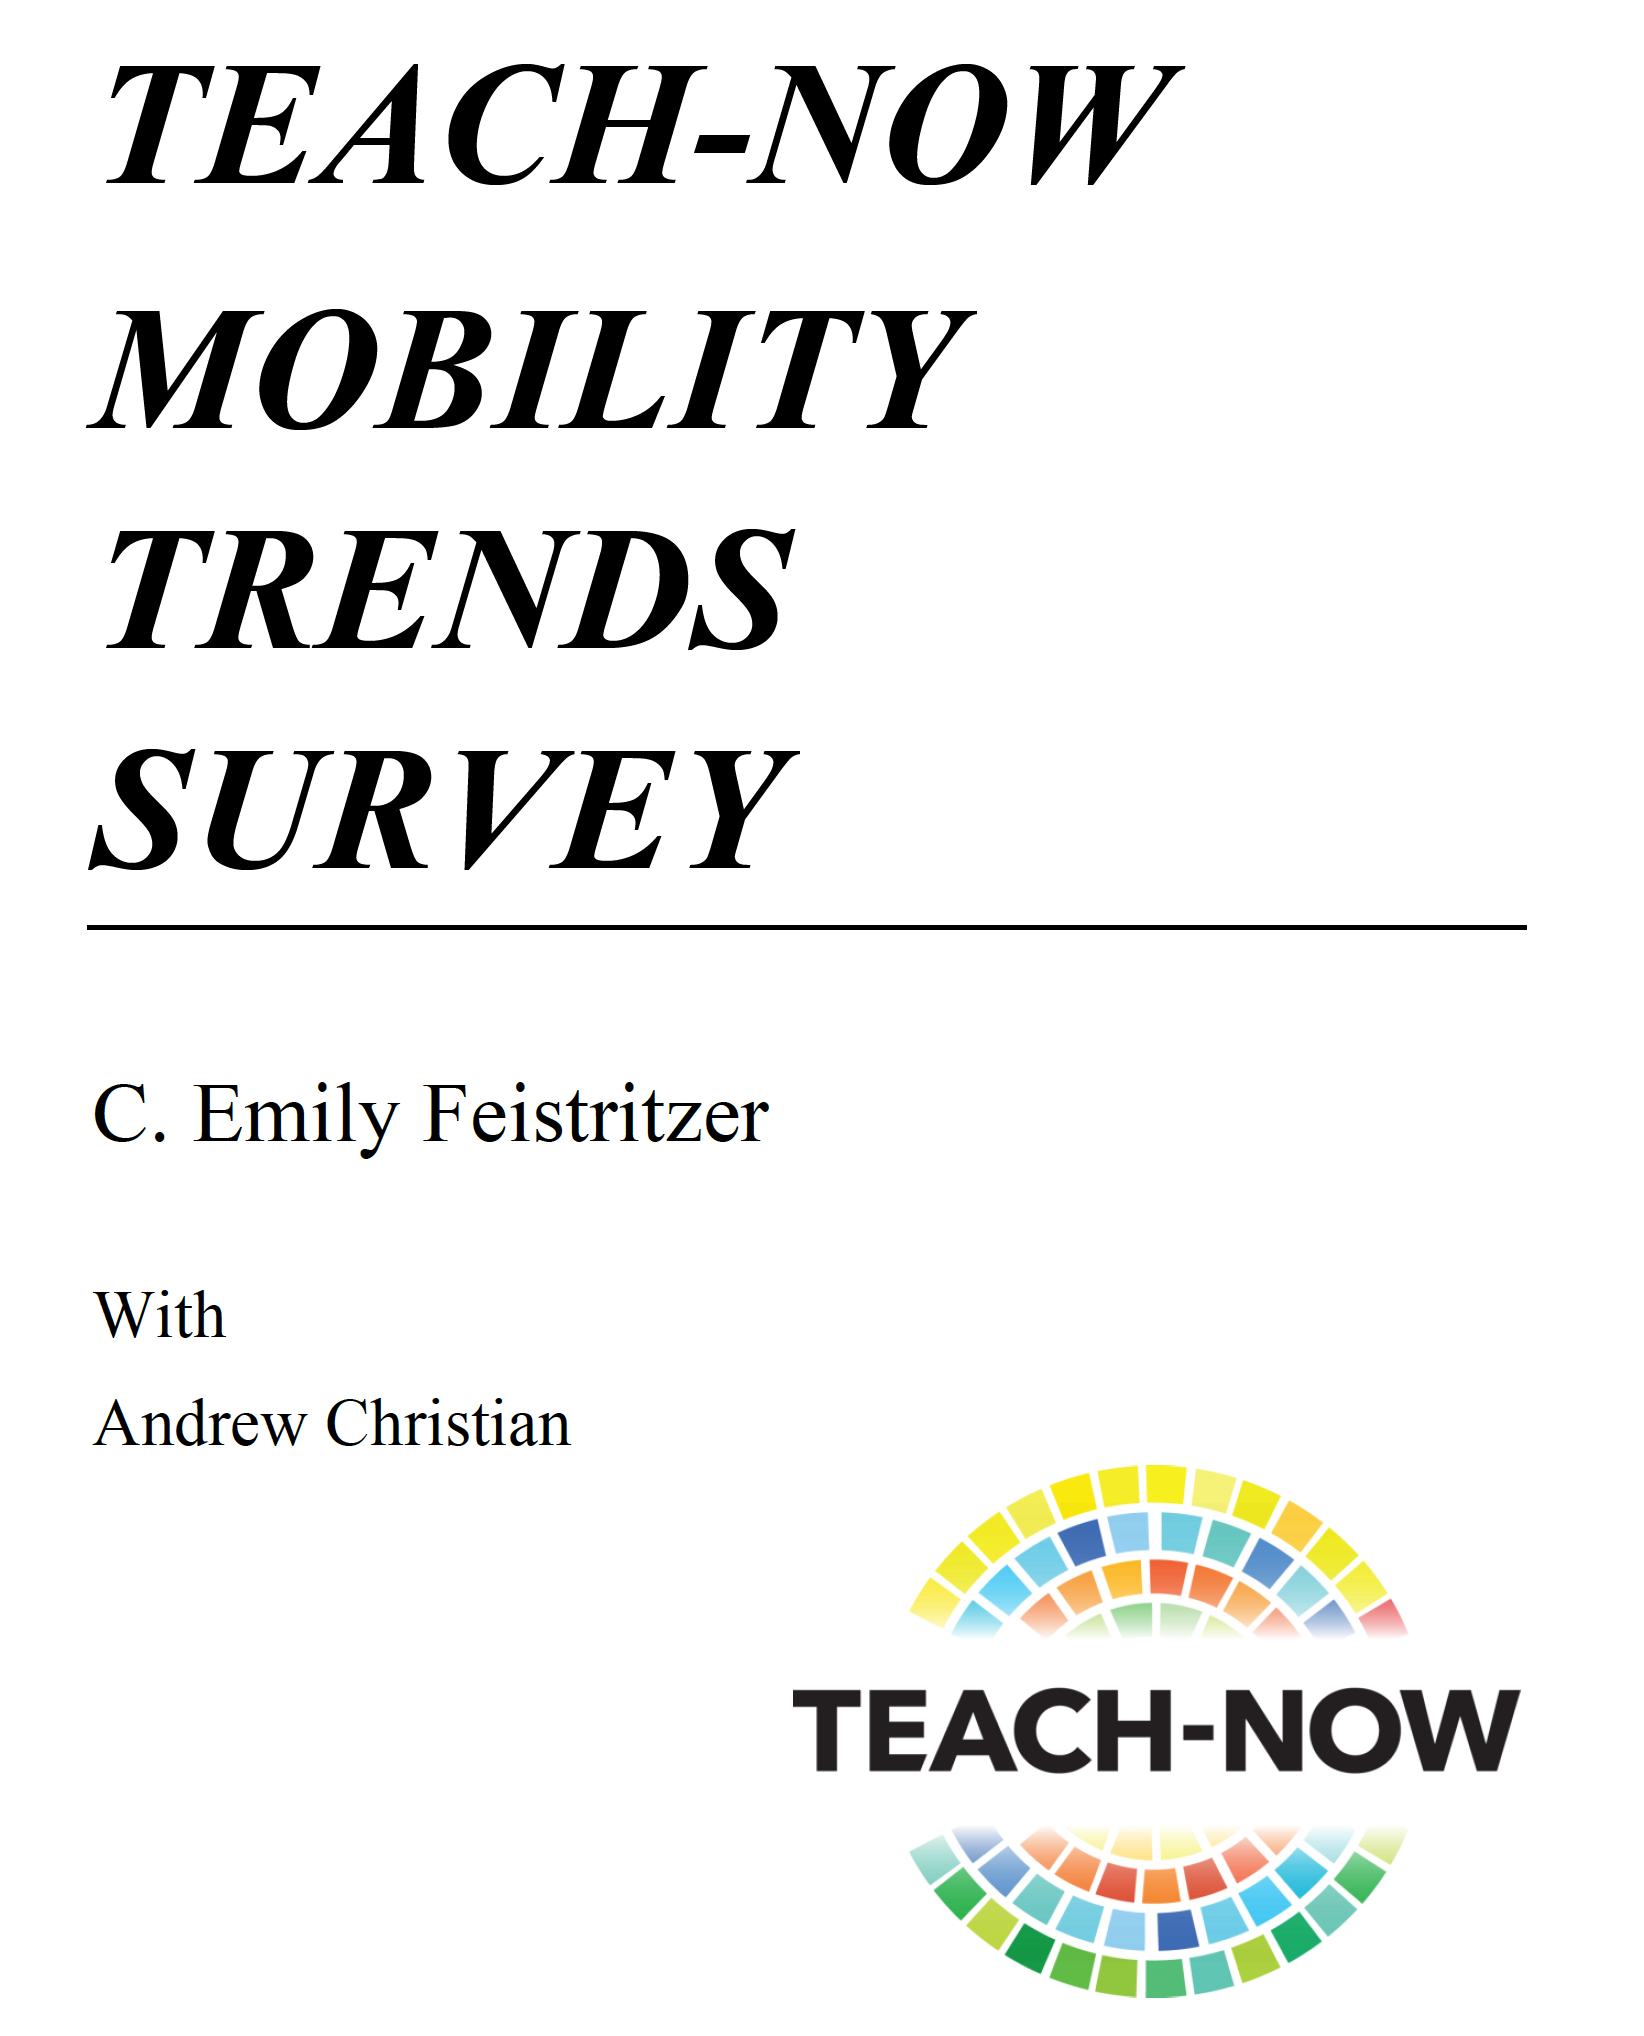 TEACH-NOW MOBILITY TRENDS SURVEY - Read our original research on 460 TEACH-NOW candidates and graduates, conducted in October 2019.